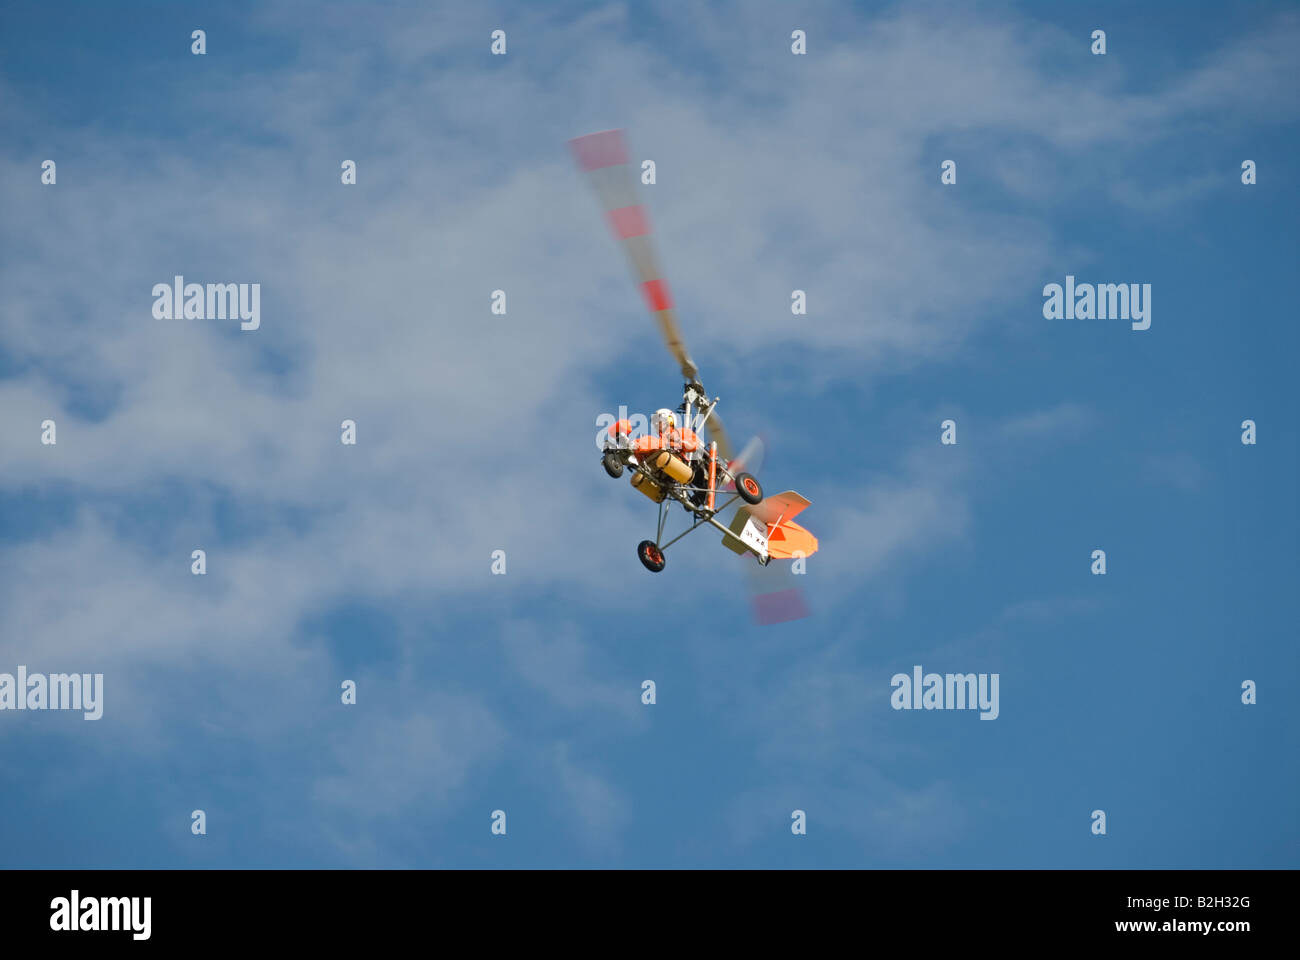 Stock photo of a single autogyro flying against a blue sky The photo was taken during a aviation dislplay in Estivol France Stock Photo